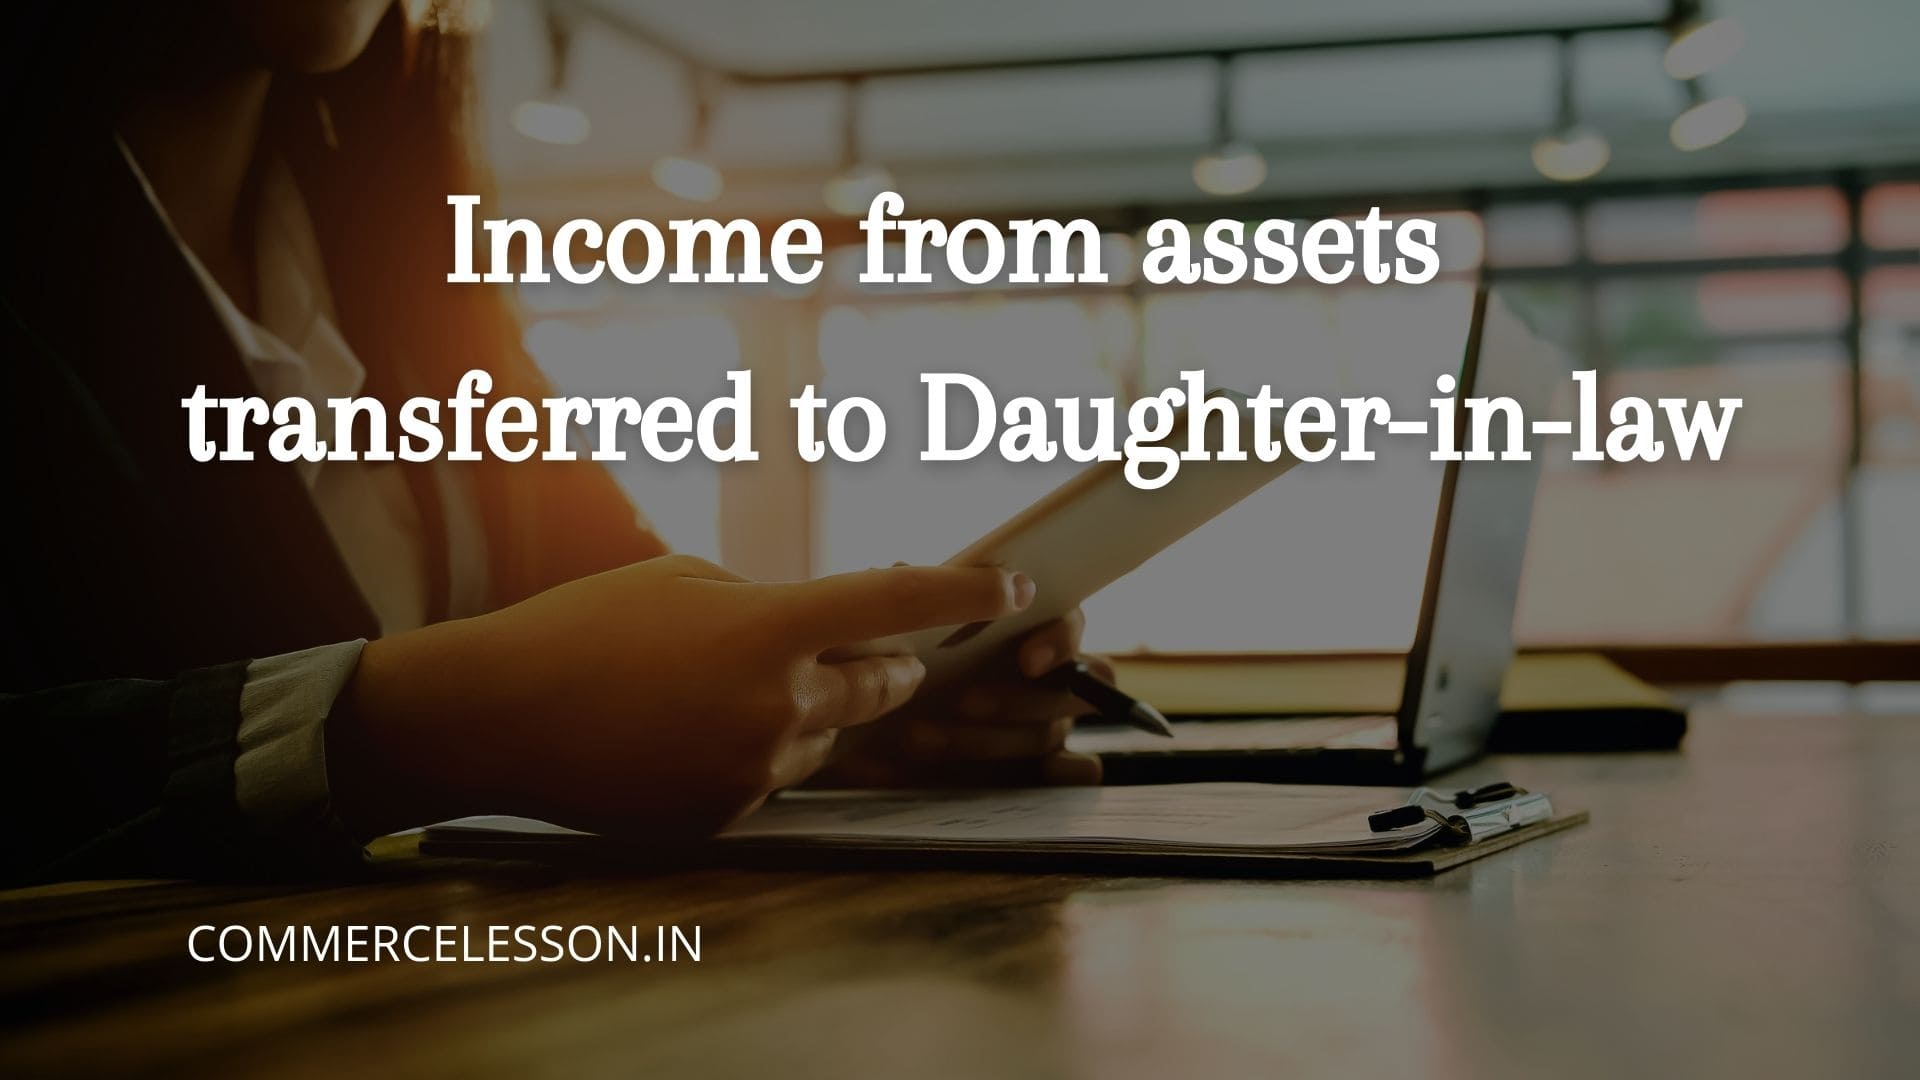 Income from assets transferred to Daughter-in-law